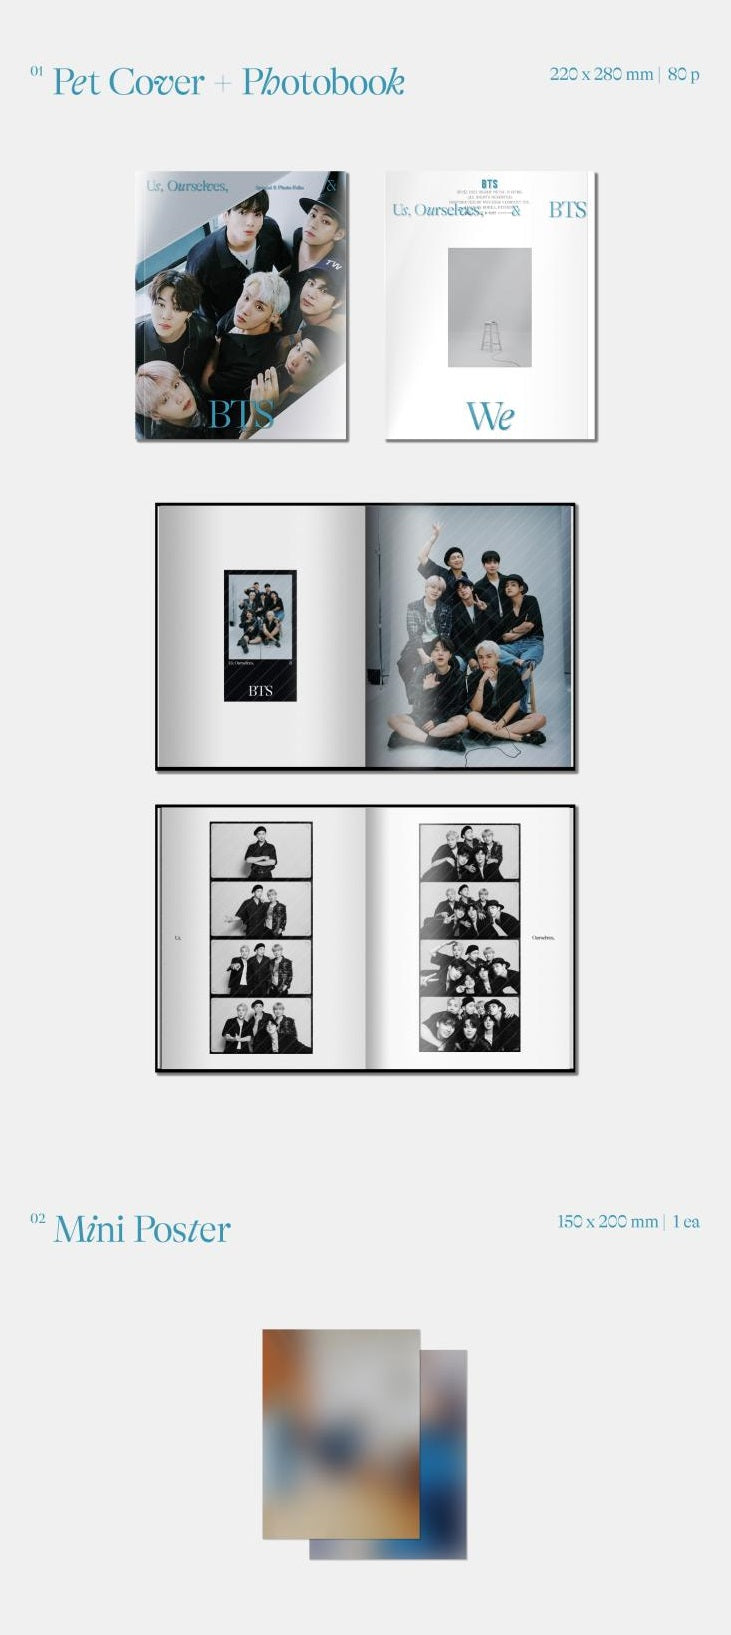 BTS - SPECIAL 8 PHOTO FOLIO US OURSELVES AND BTS WE SET VER 